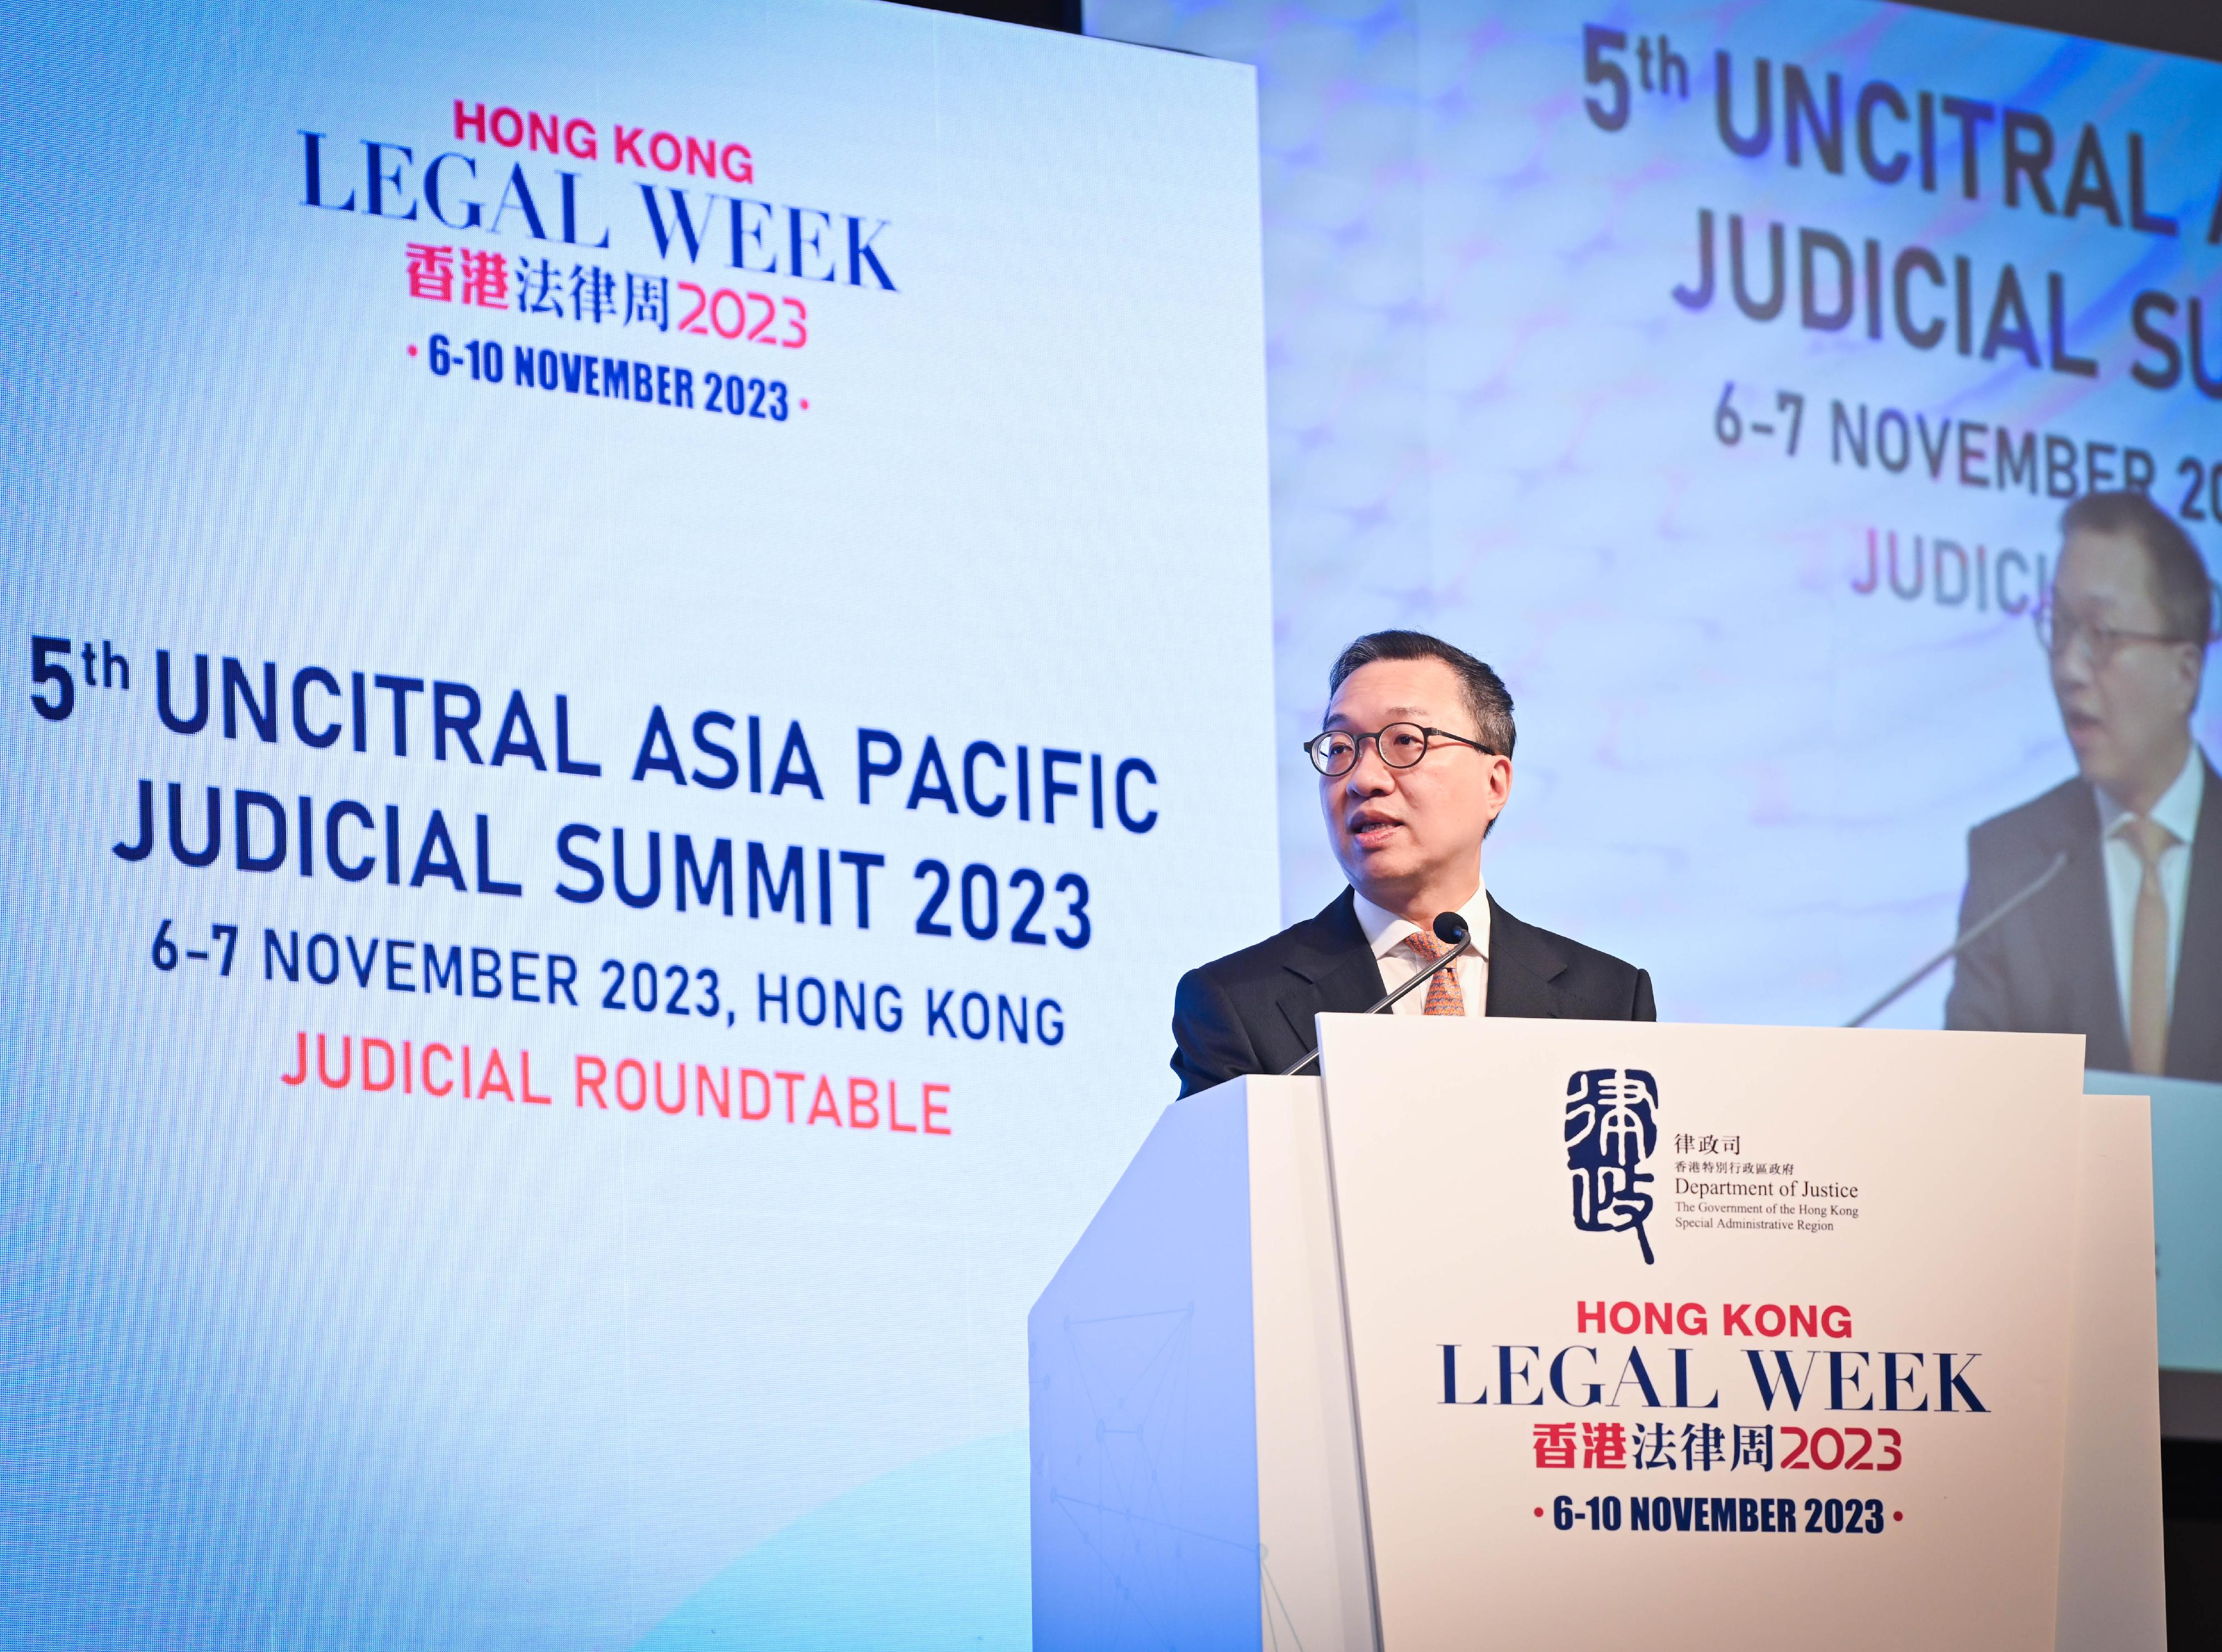 The Secretary for Justice, Mr Paul Lam, SC, delivers welcome remarks at the 5th UNCITRAL Asia Pacific Judicial Summit - Judicial Roundtable under the Hong Kong Legal Week 2023 today (November 7).

